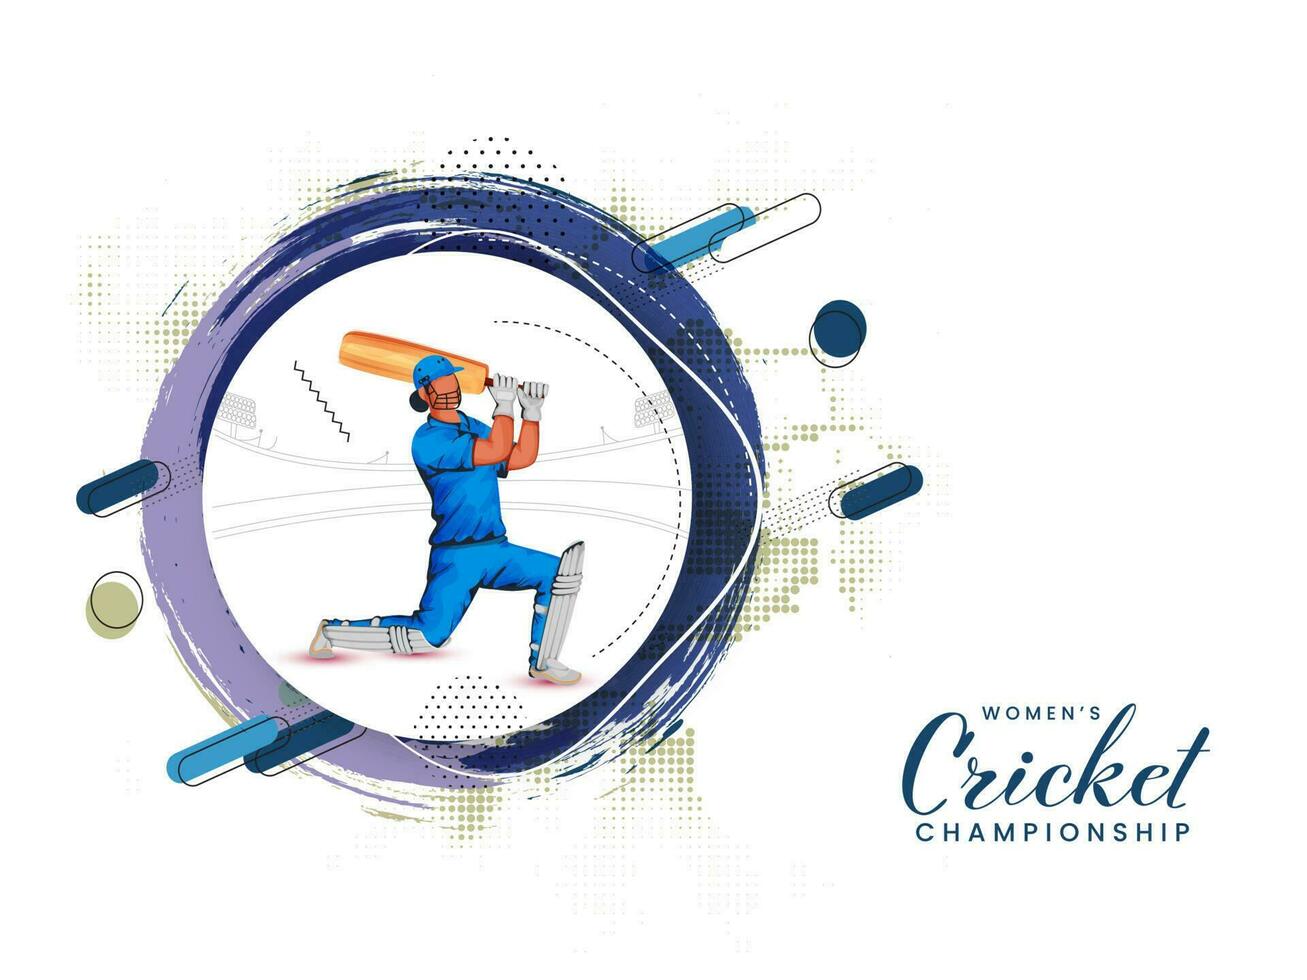 Women's Cricket Championship Concept With Cartoon Female Batter Player, Circular Brush Effect And Halftone On White Background. vector